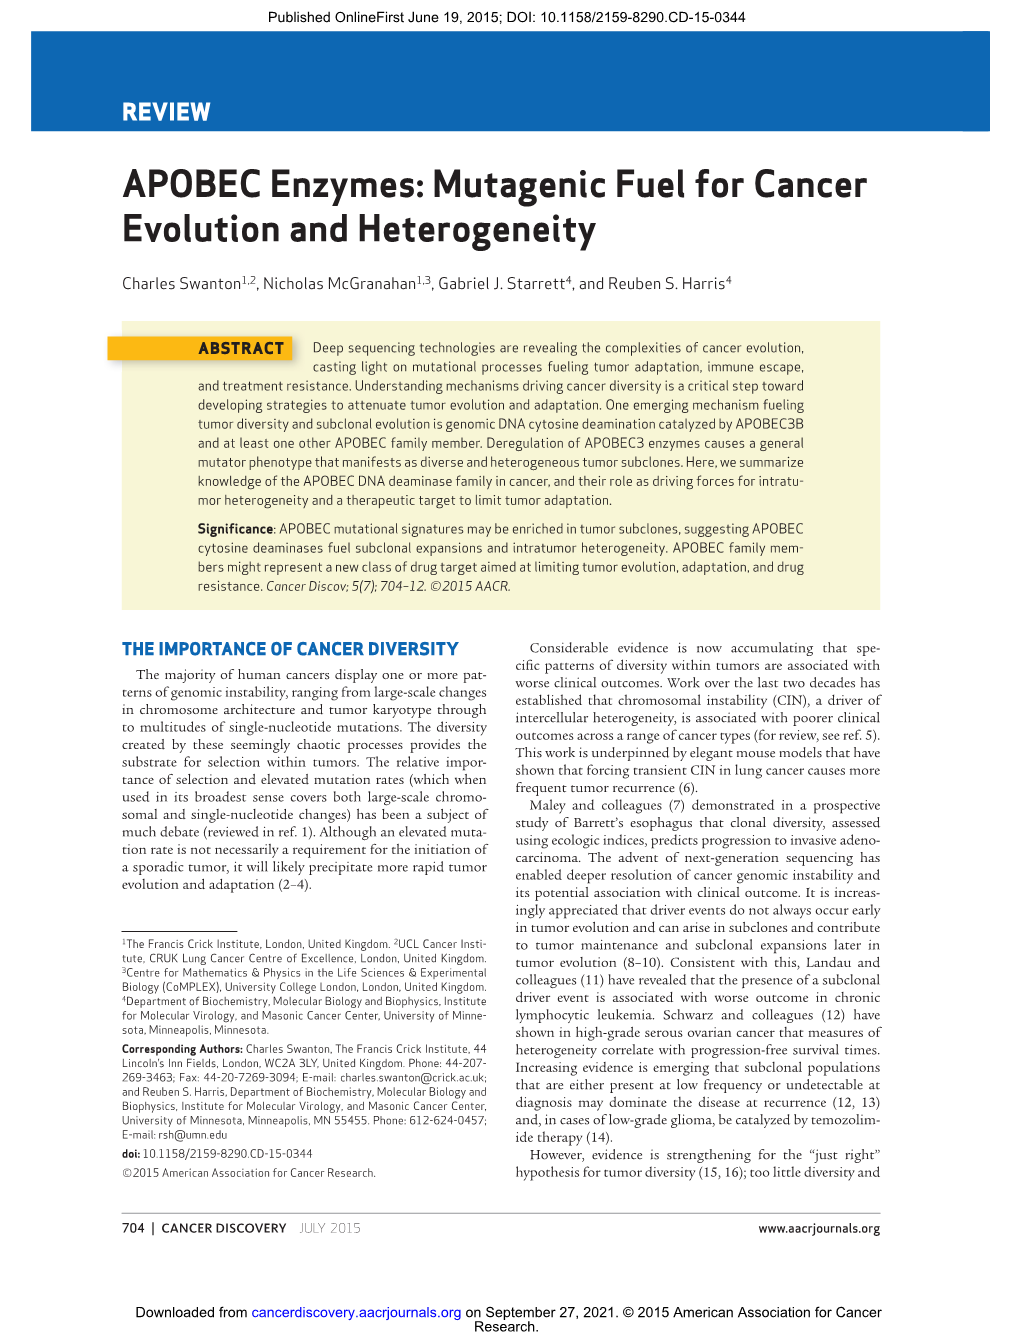 APOBEC Enzymes: Mutagenic Fuel for Cancer Evolution and Heterogeneity